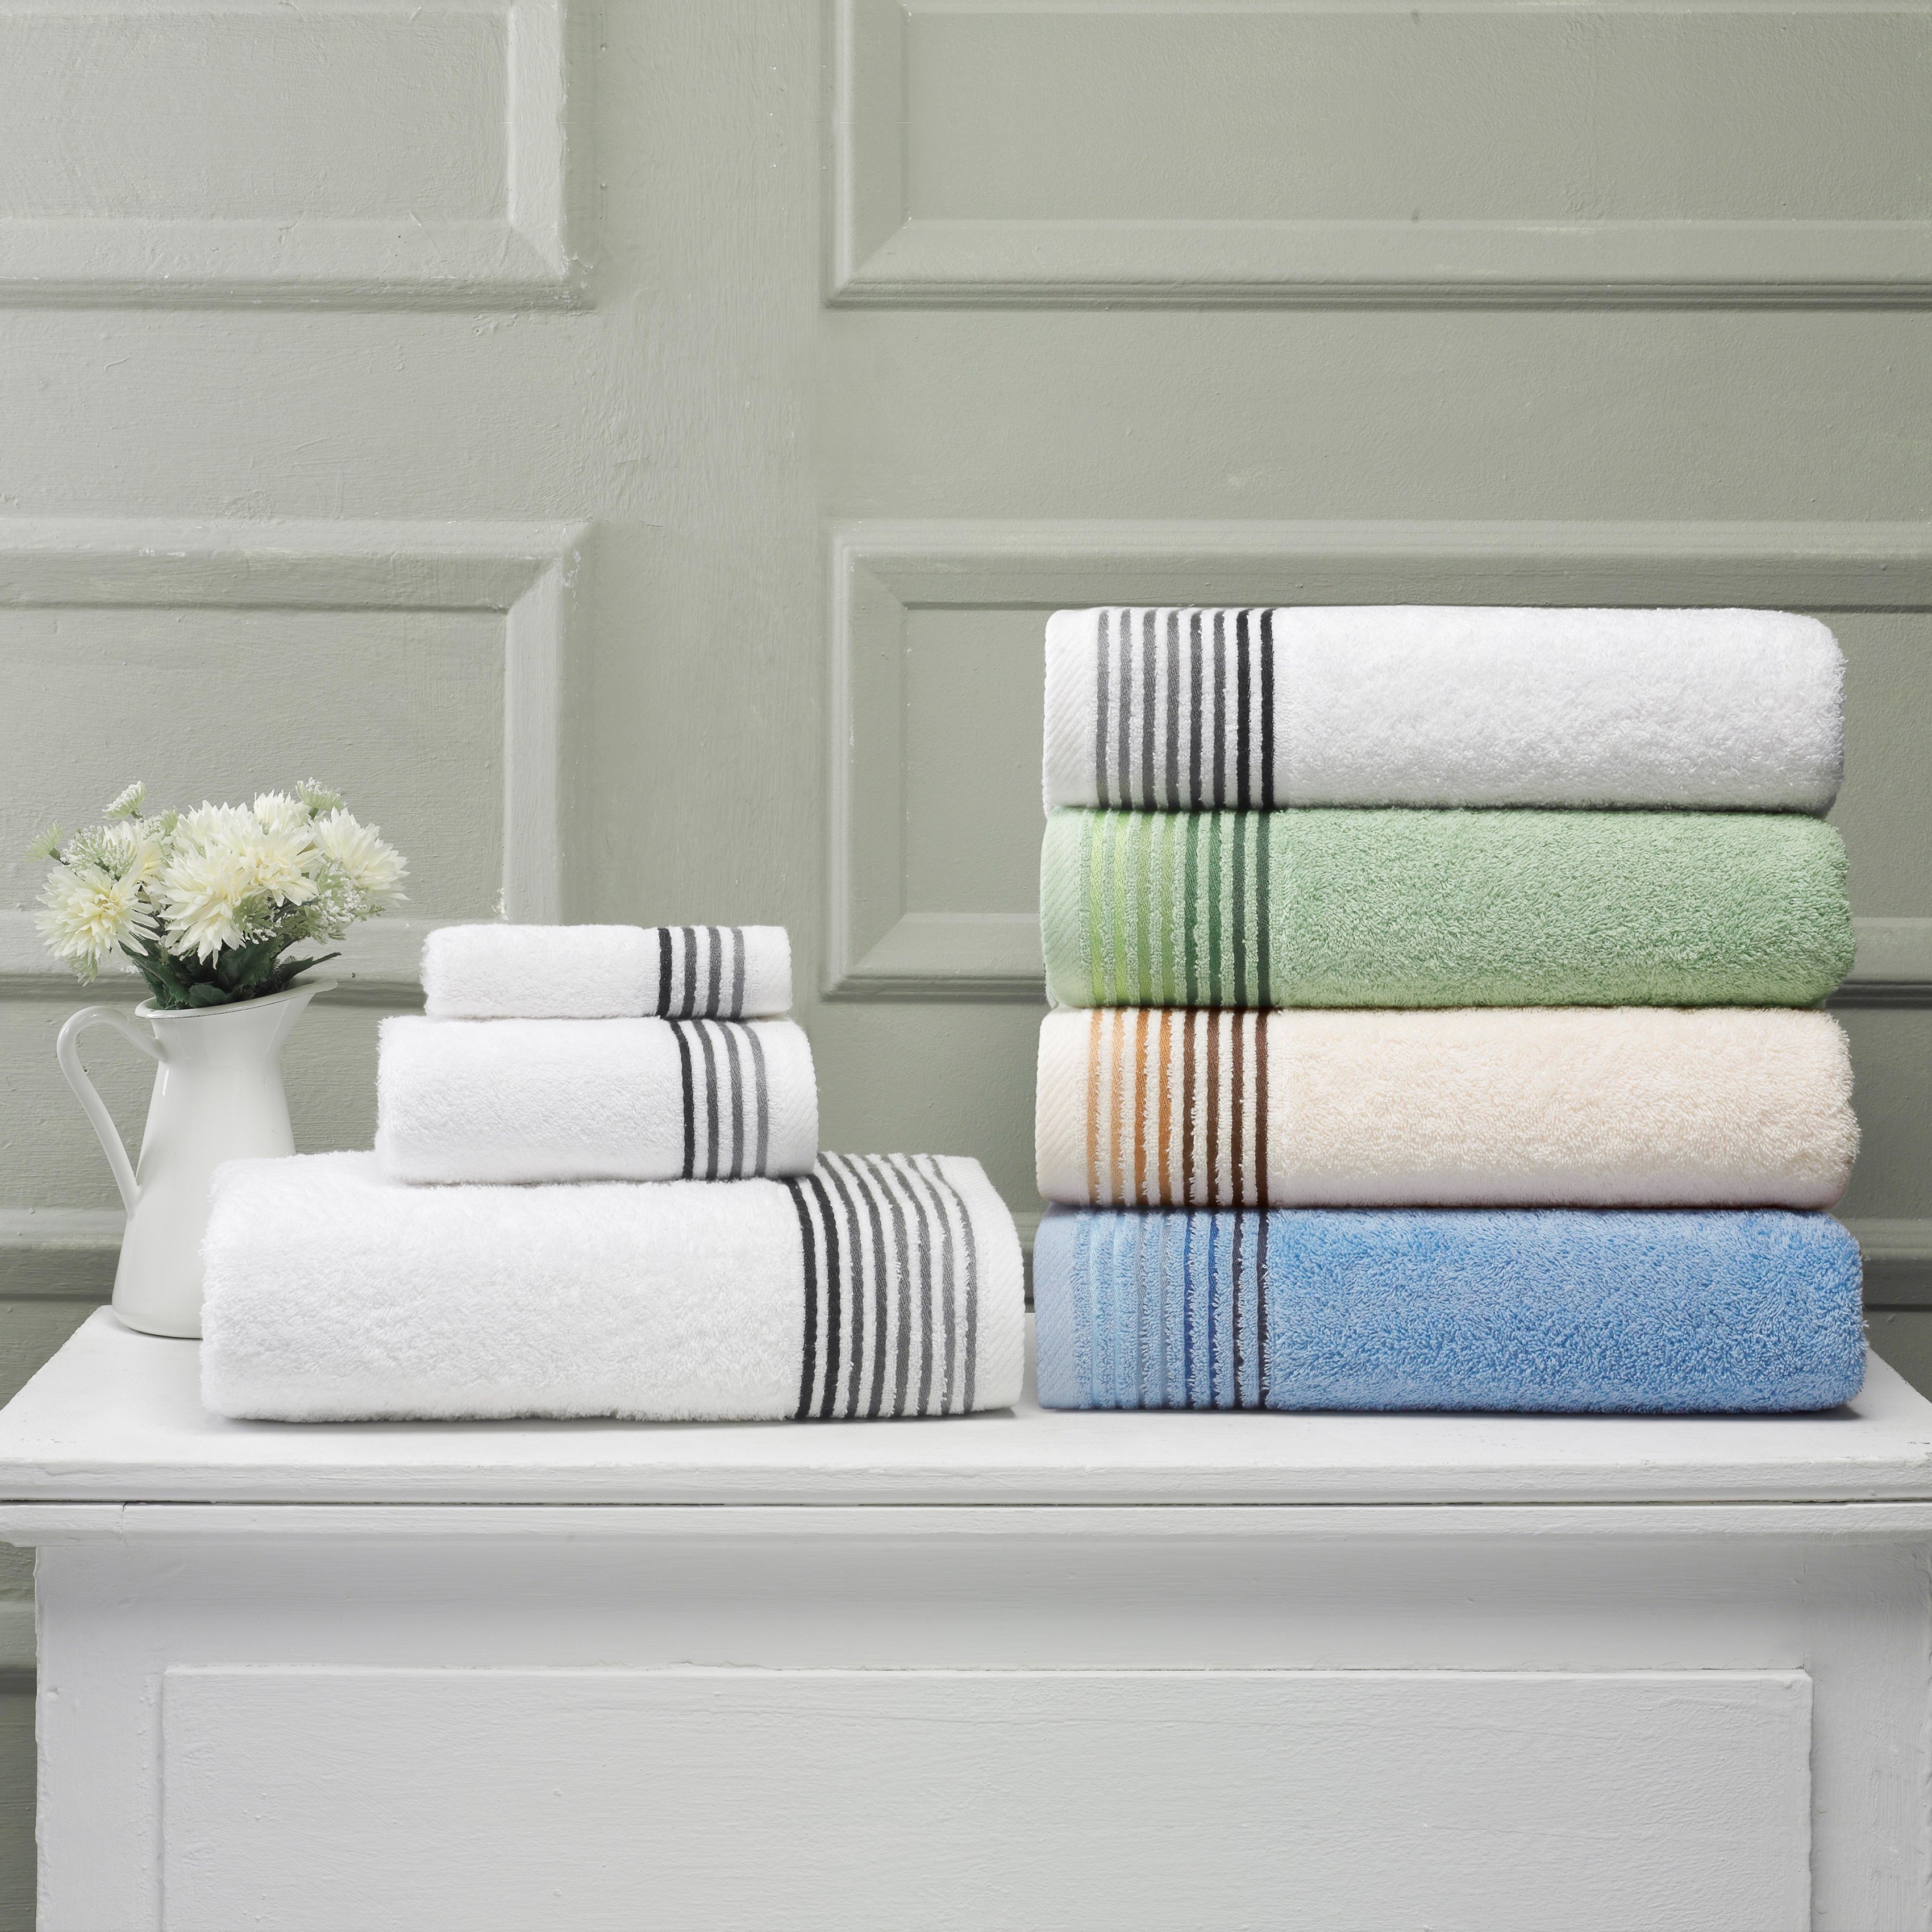 https://ak1.ostkcdn.com/images/products/is/images/direct/6f7e9b8c26fbc32989501e86e43e3d83c5bfbcd2/Royal-Turkish-Towels-Luxury-Soft-Turkish-Cotton-Bamboo-Towel-Set-of-8.jpg